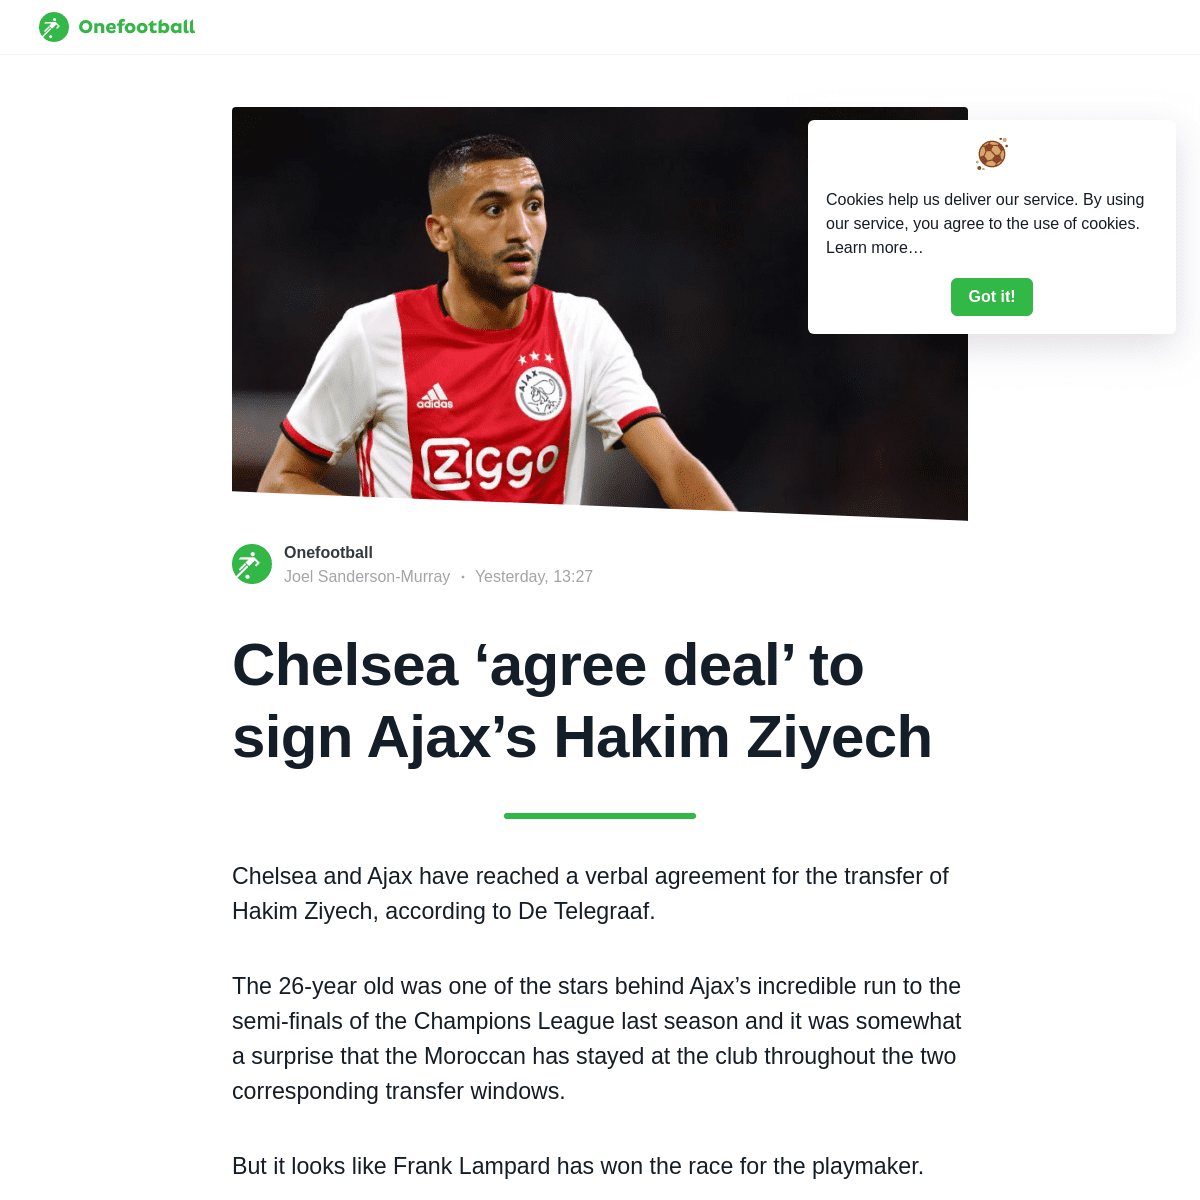 A complete backup of en.onefootball.com/chelsea-agree-deal-to-sign-ajaxs-hakim-ziyech/